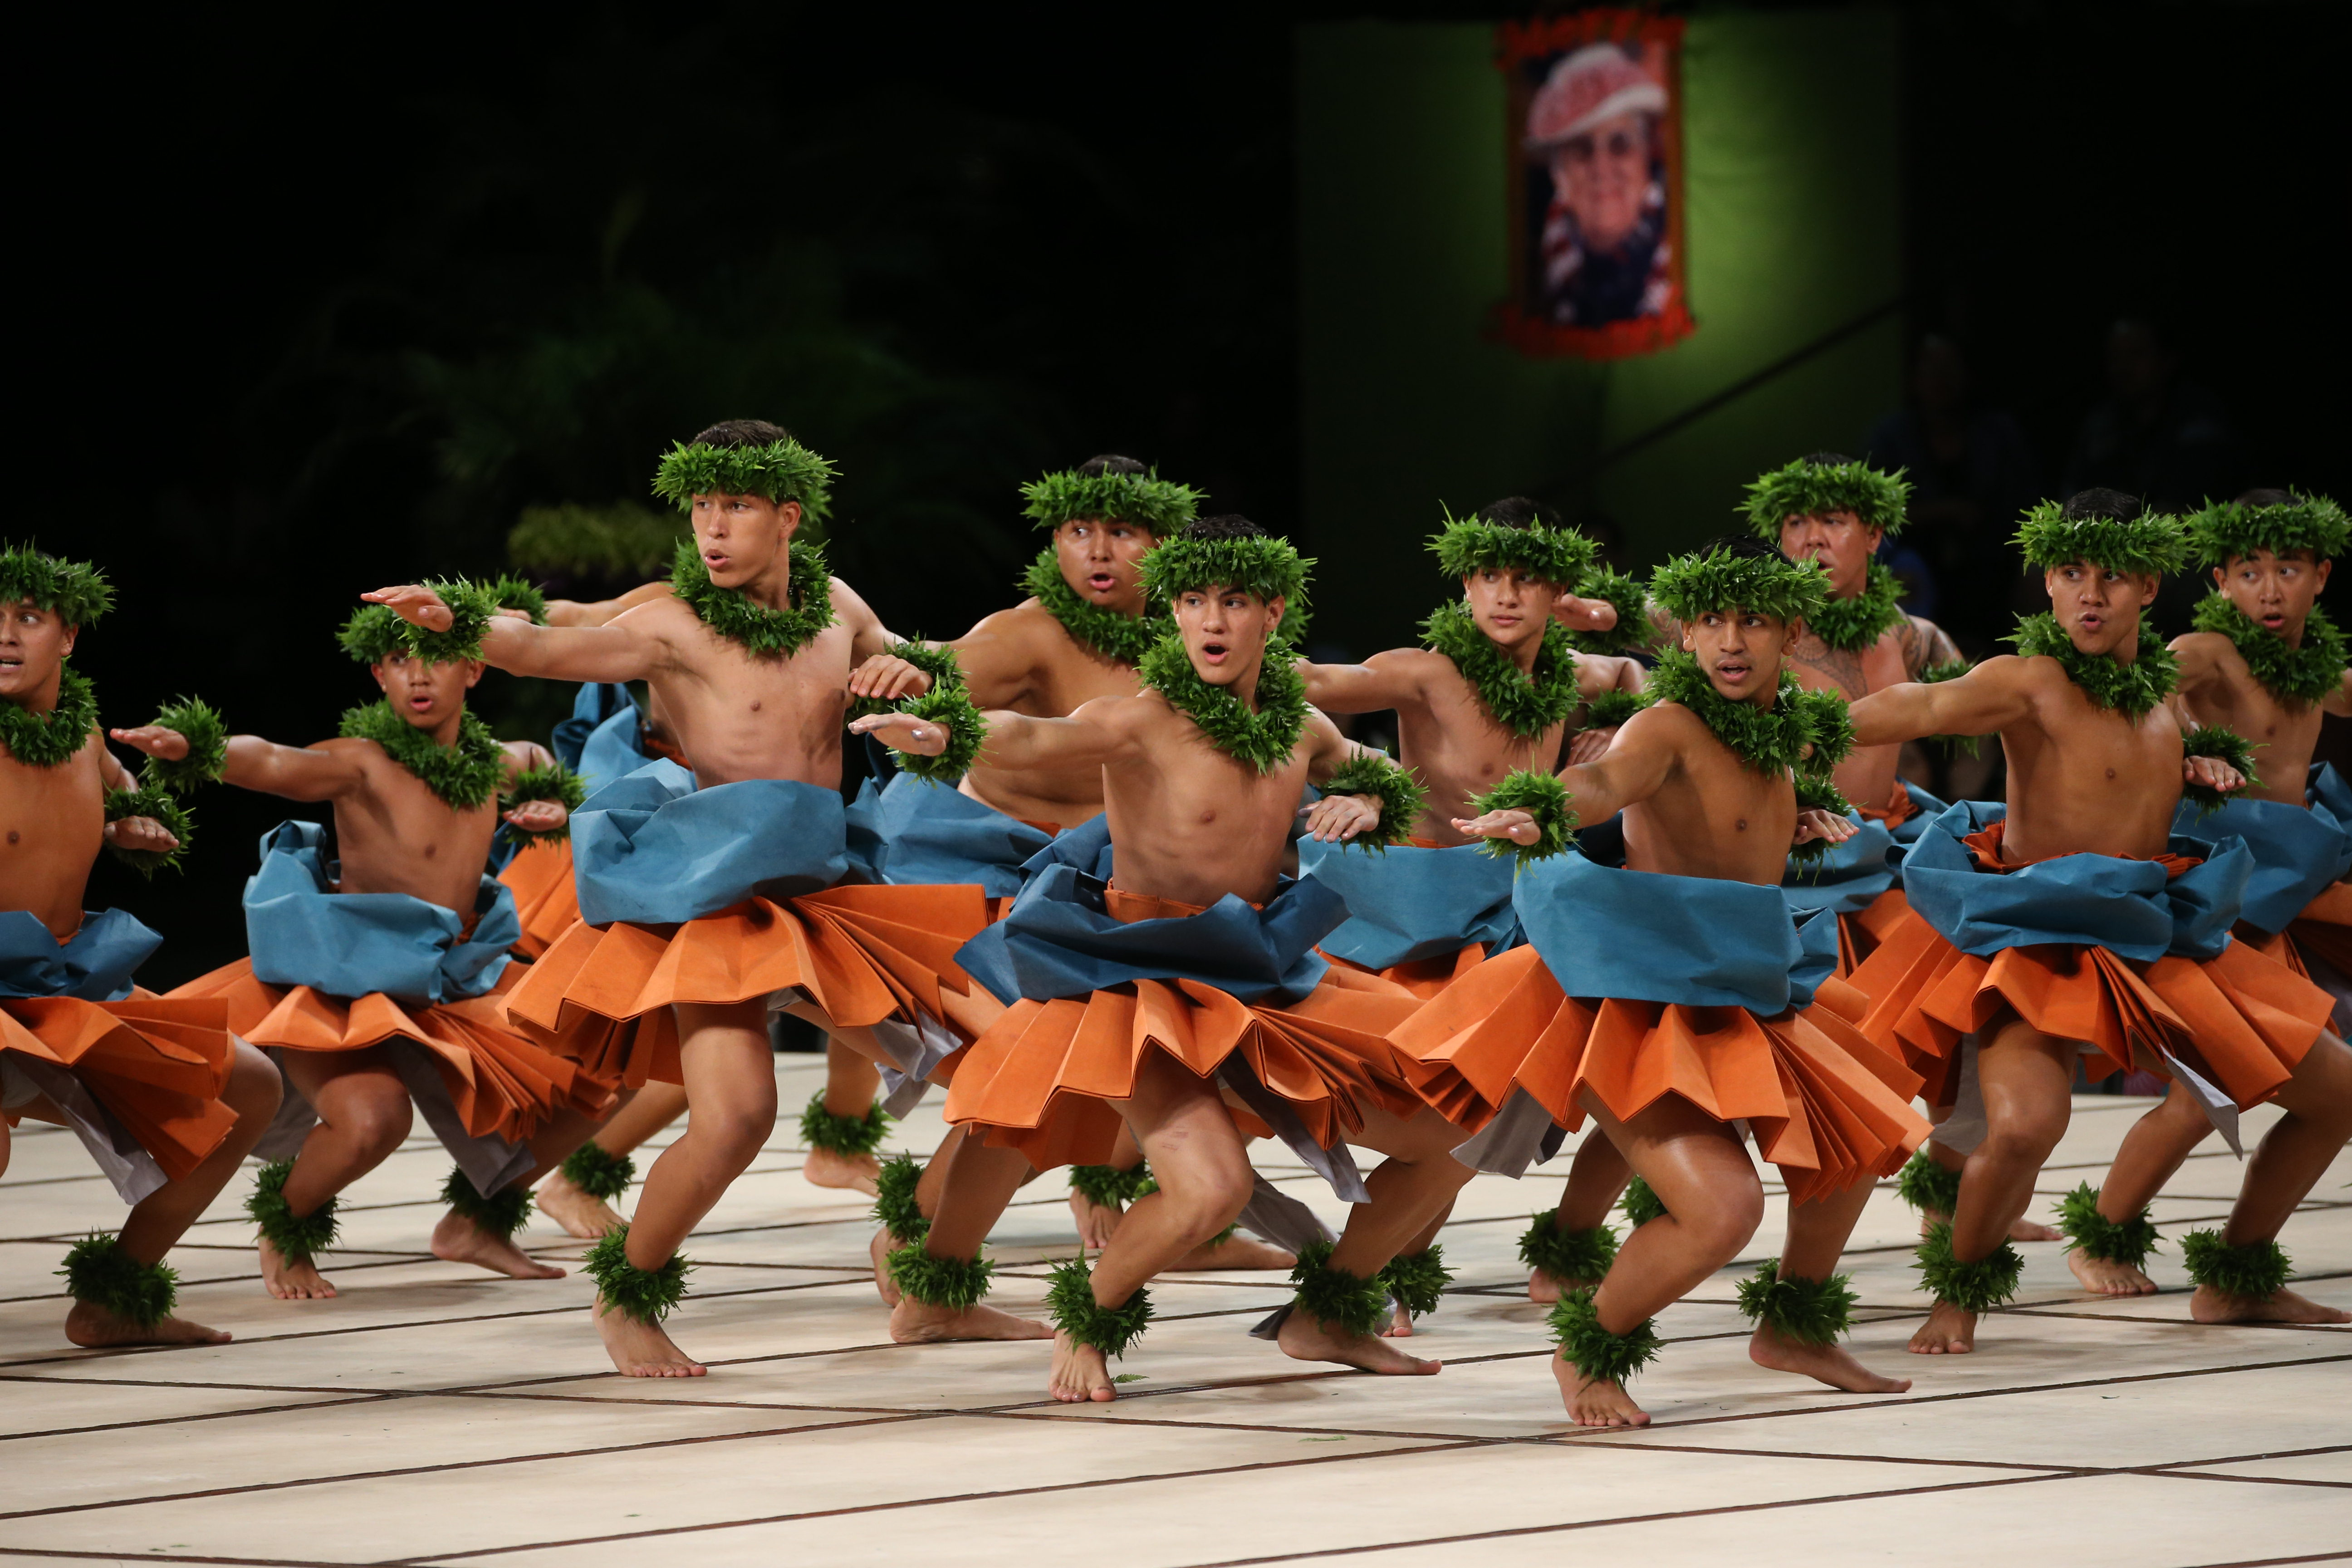 The Merrie Monarch Festival continues July 3. Here's how you can watch the  action!